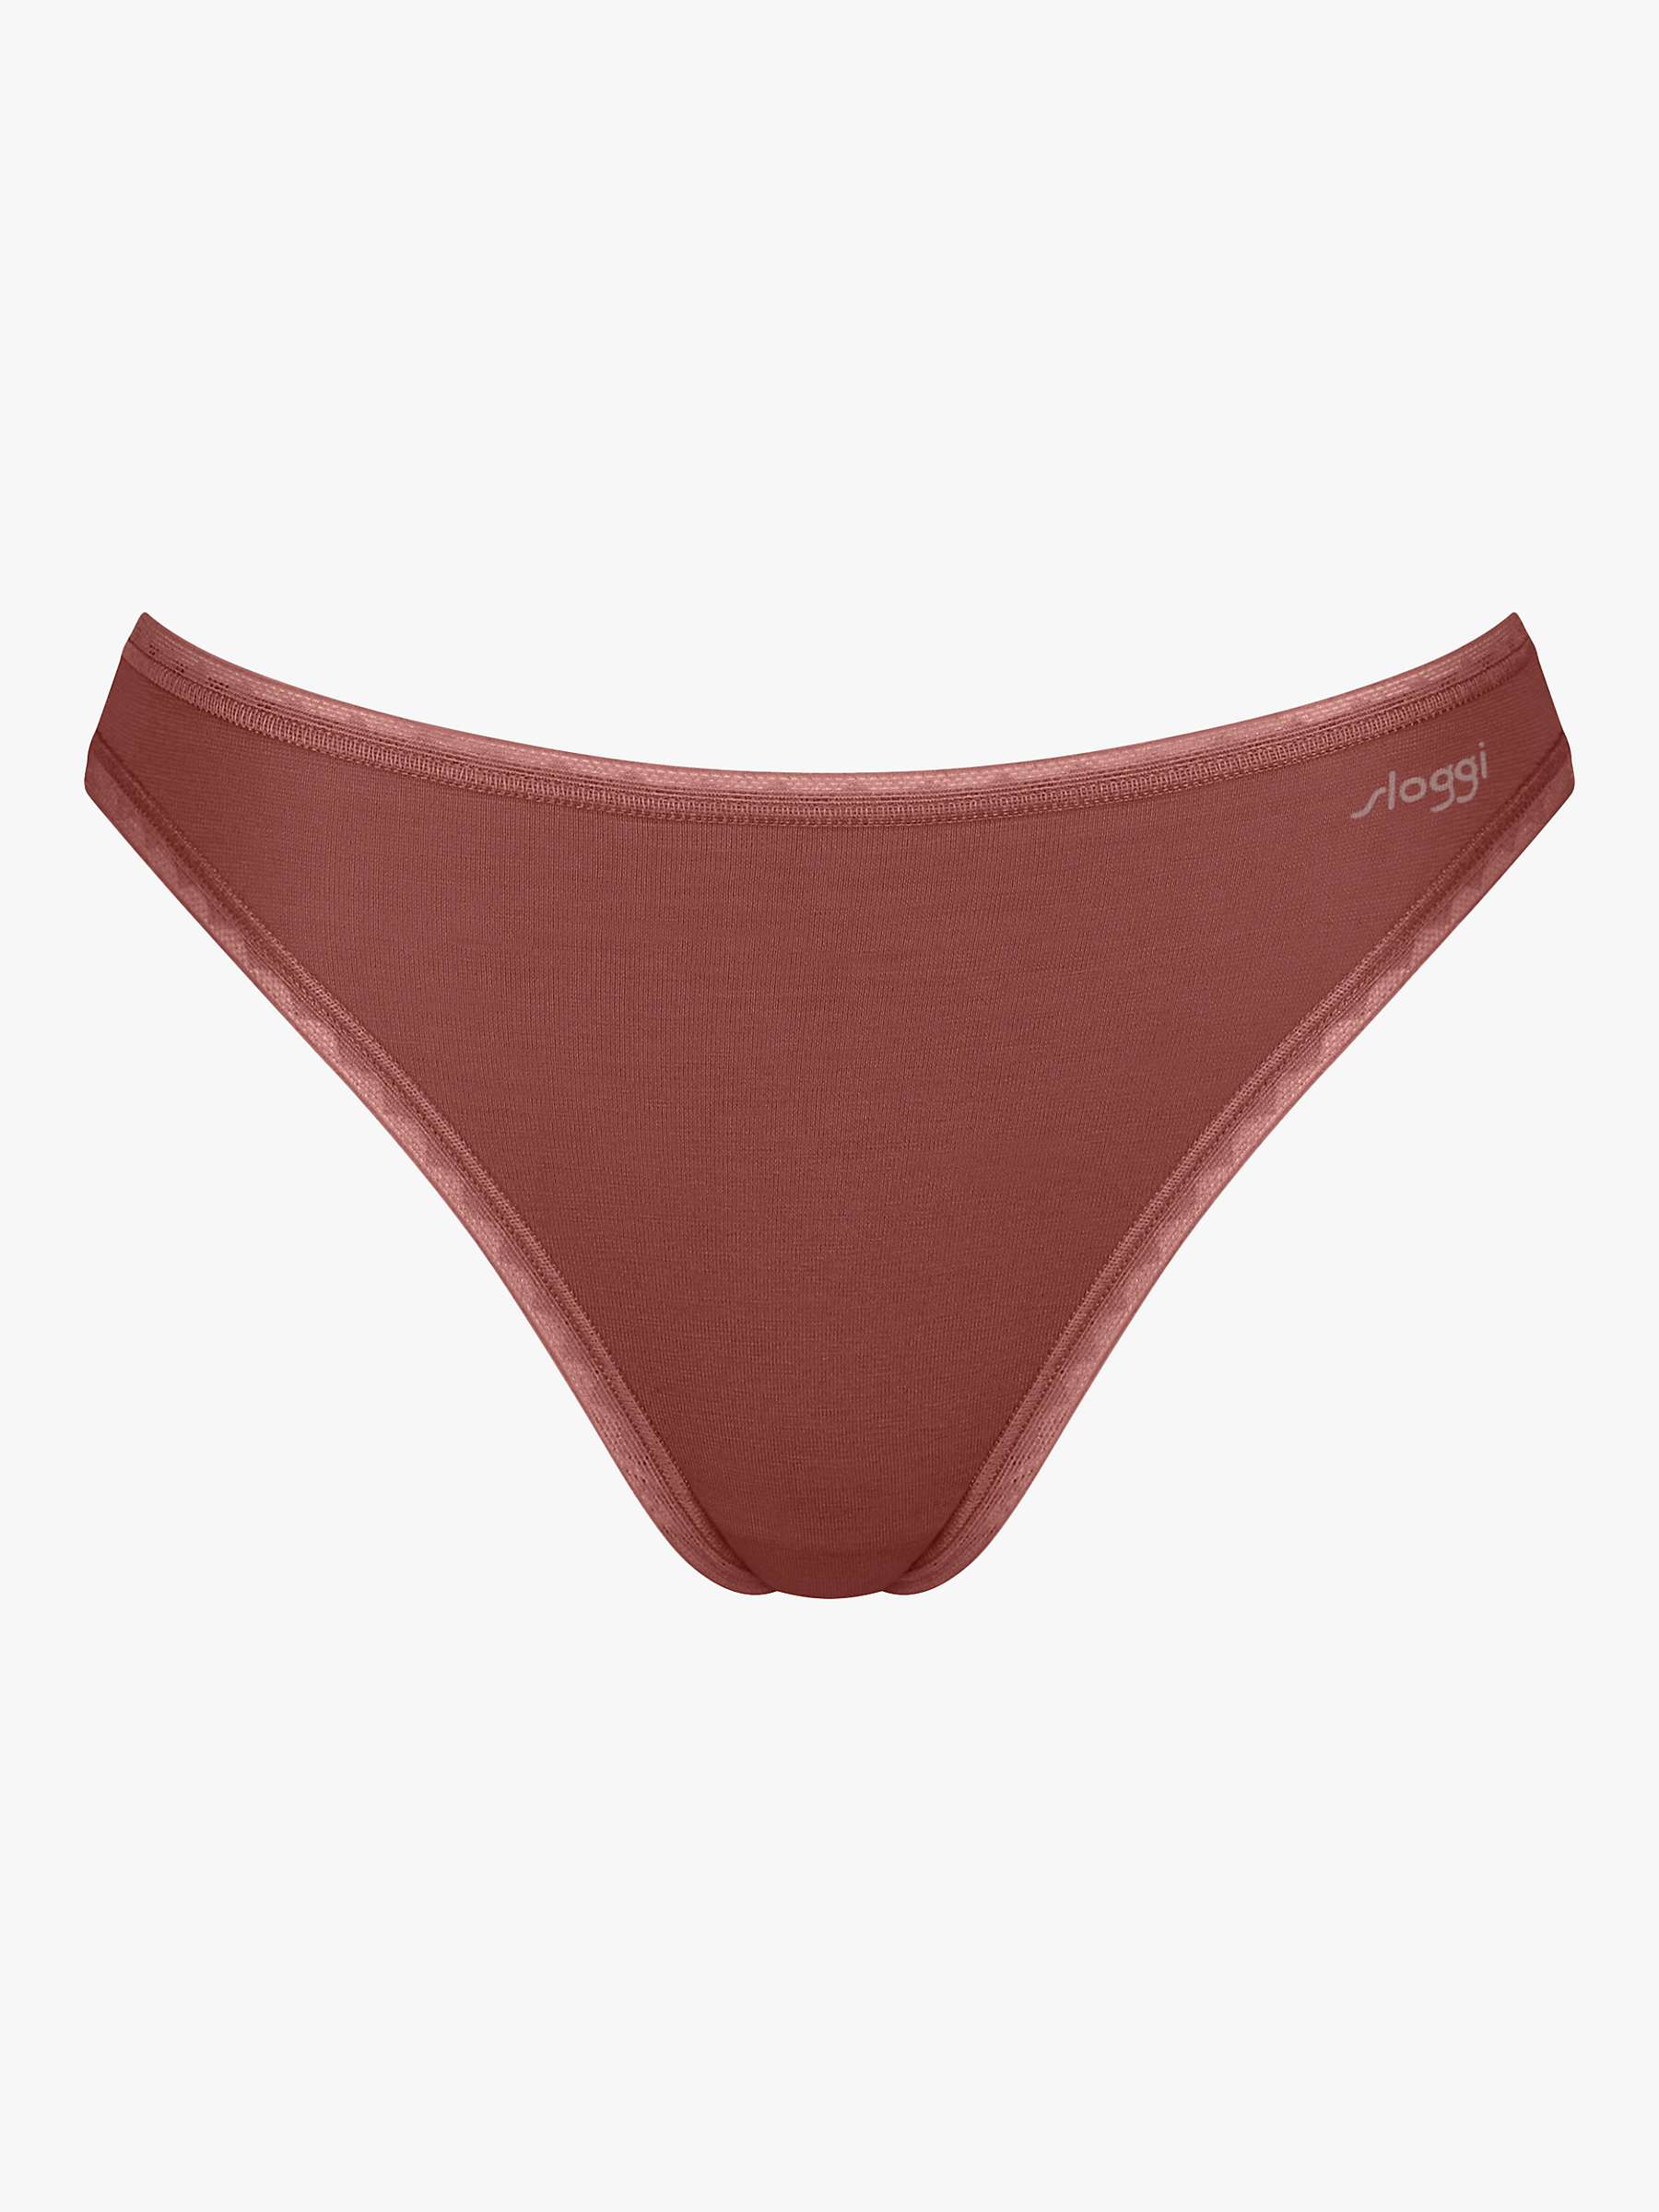 Buy sloggi GO Tai Knickers, Pack of 2, Red/Light Comb Online at johnlewis.com